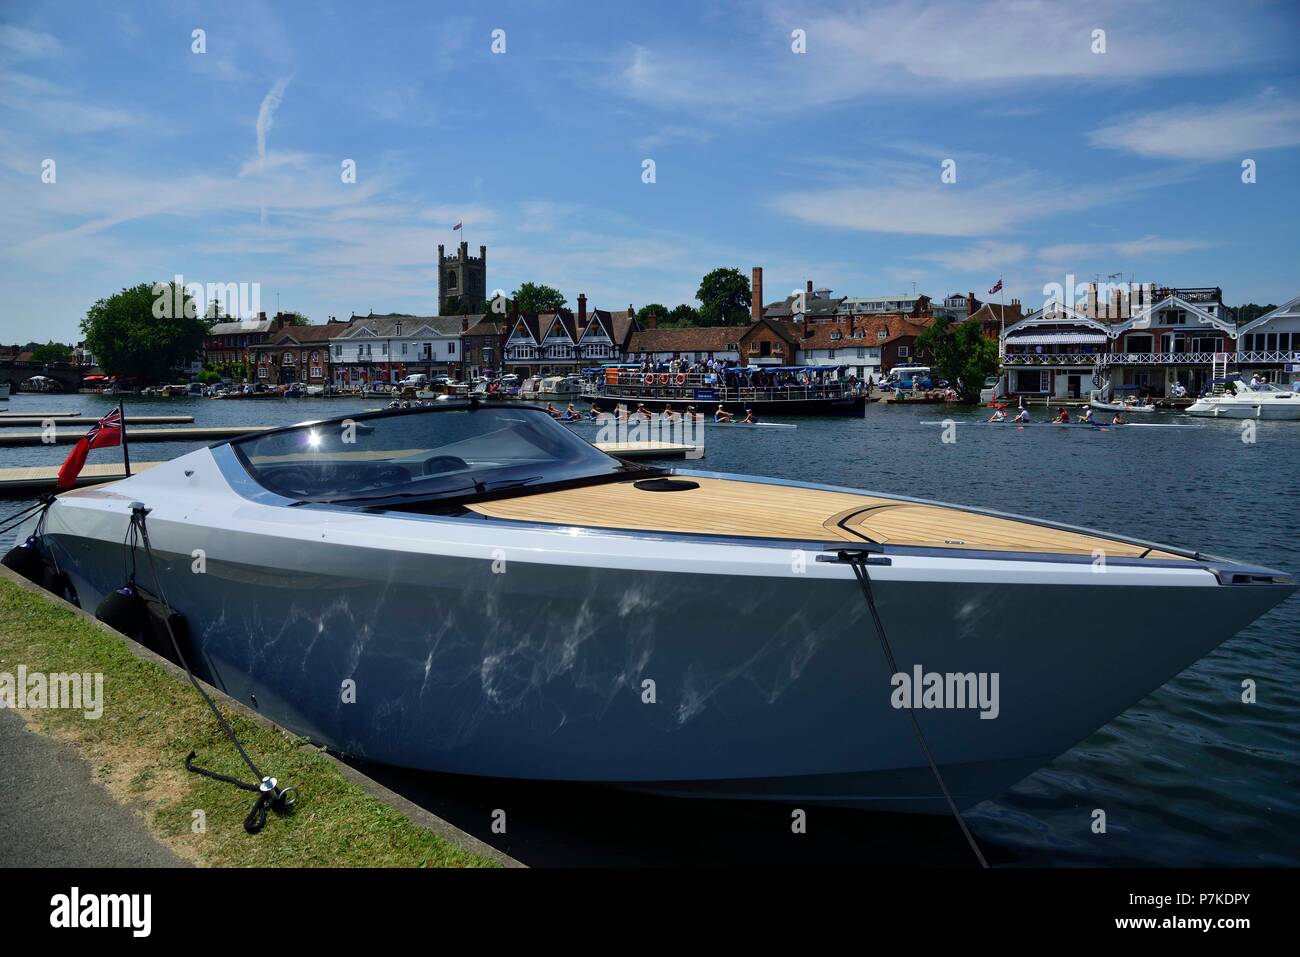 Henley Royal Regatta, Henley-on-Thames, UK. 6th July 2018. Henley Royal Regatta has for the first time in its 178 year history partnered with four prestigious British brands one of whom is Aston Martin who are showing several of their luxury cars together with this AM37 power boat.  This version is priced at £1.4M Credit Wendy Johnson/Alamy Live News Credit: Wendy Johnson/Alamy Live News Stock Photo